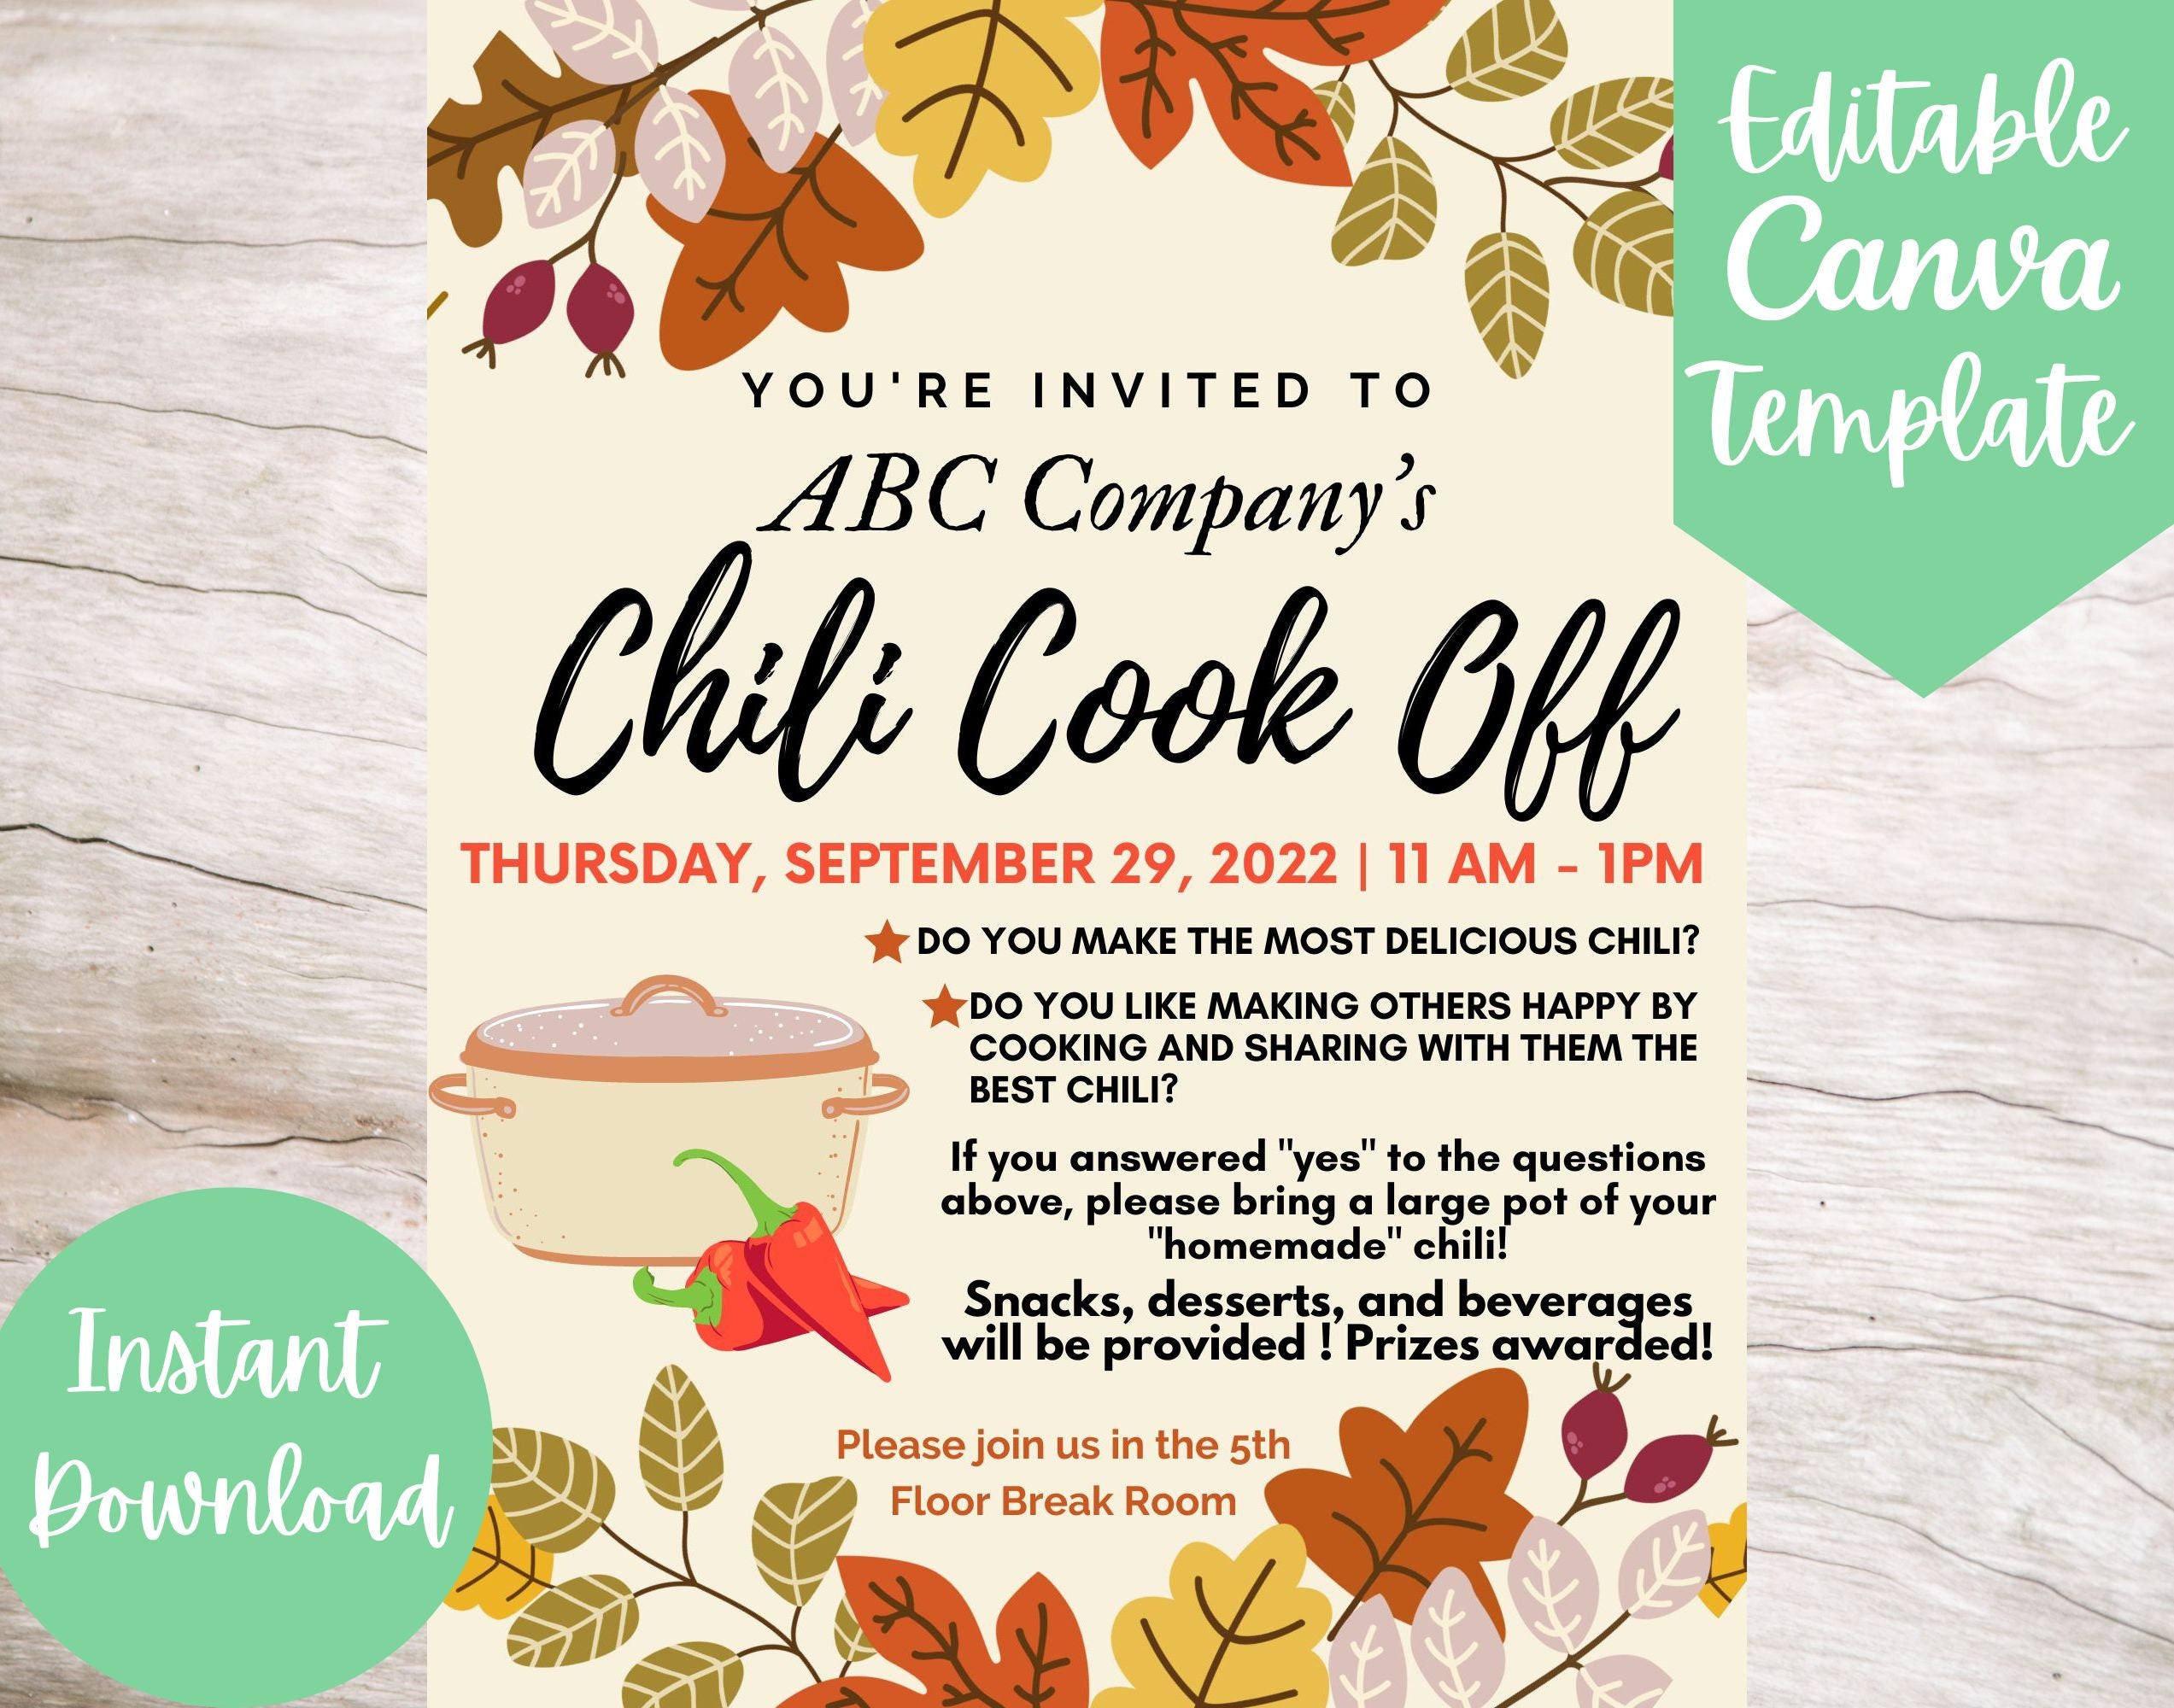 Editable and Printable Office Chili Cook off Invitation Flyer photo